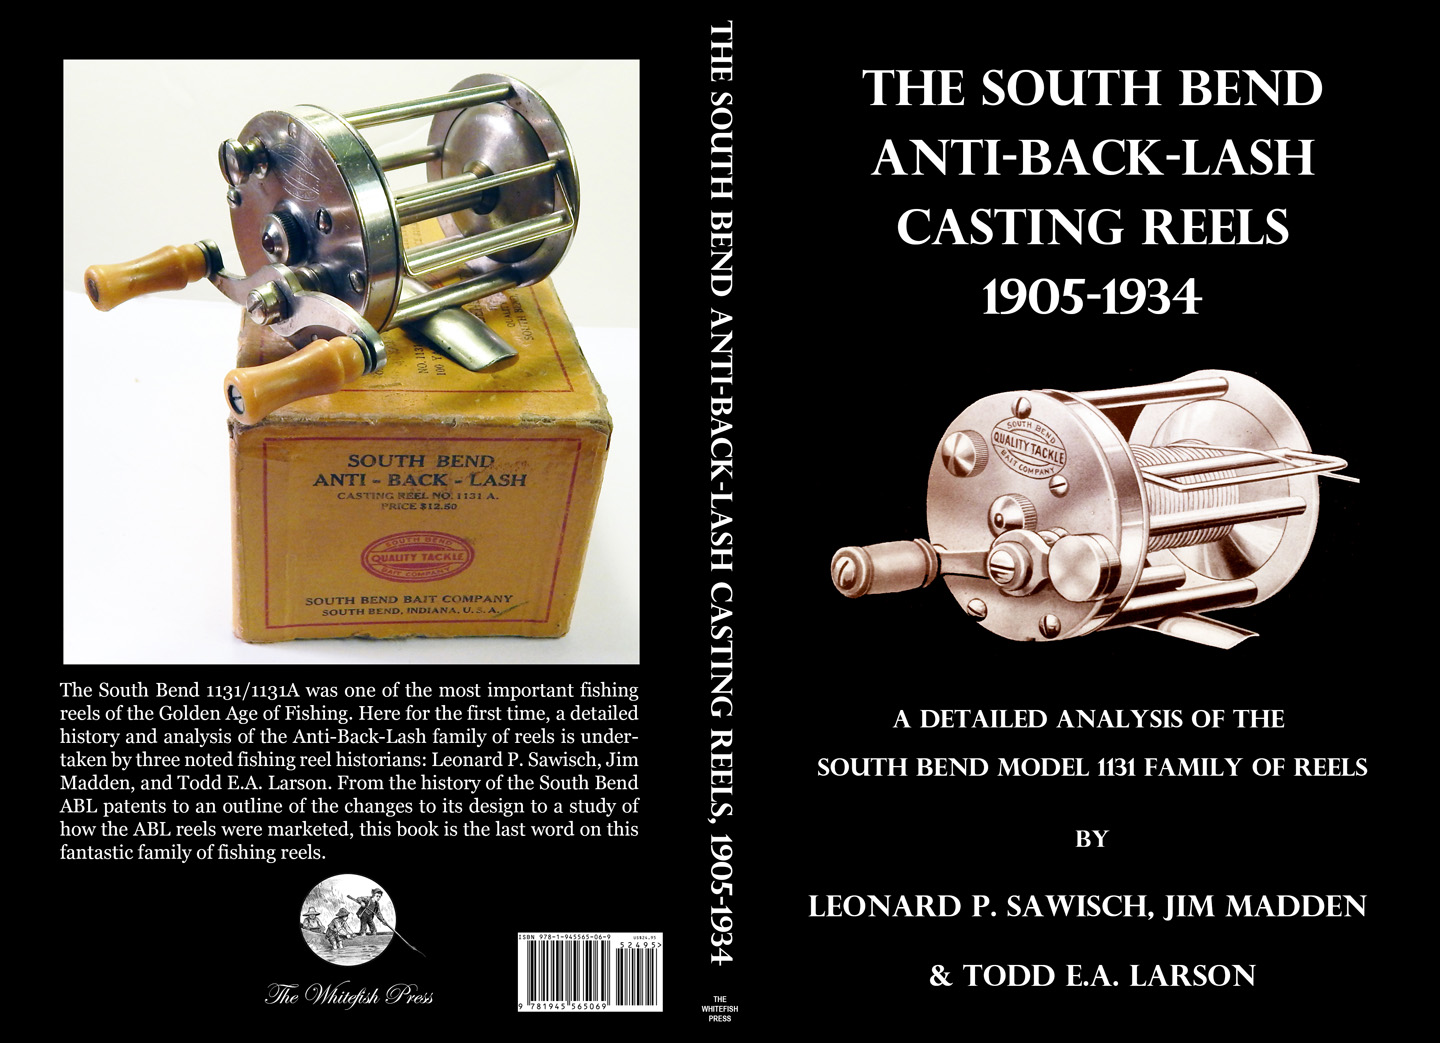 The South Bend Anti-Back-Lash Casting Reels 1905-1934 (Hard Cover)